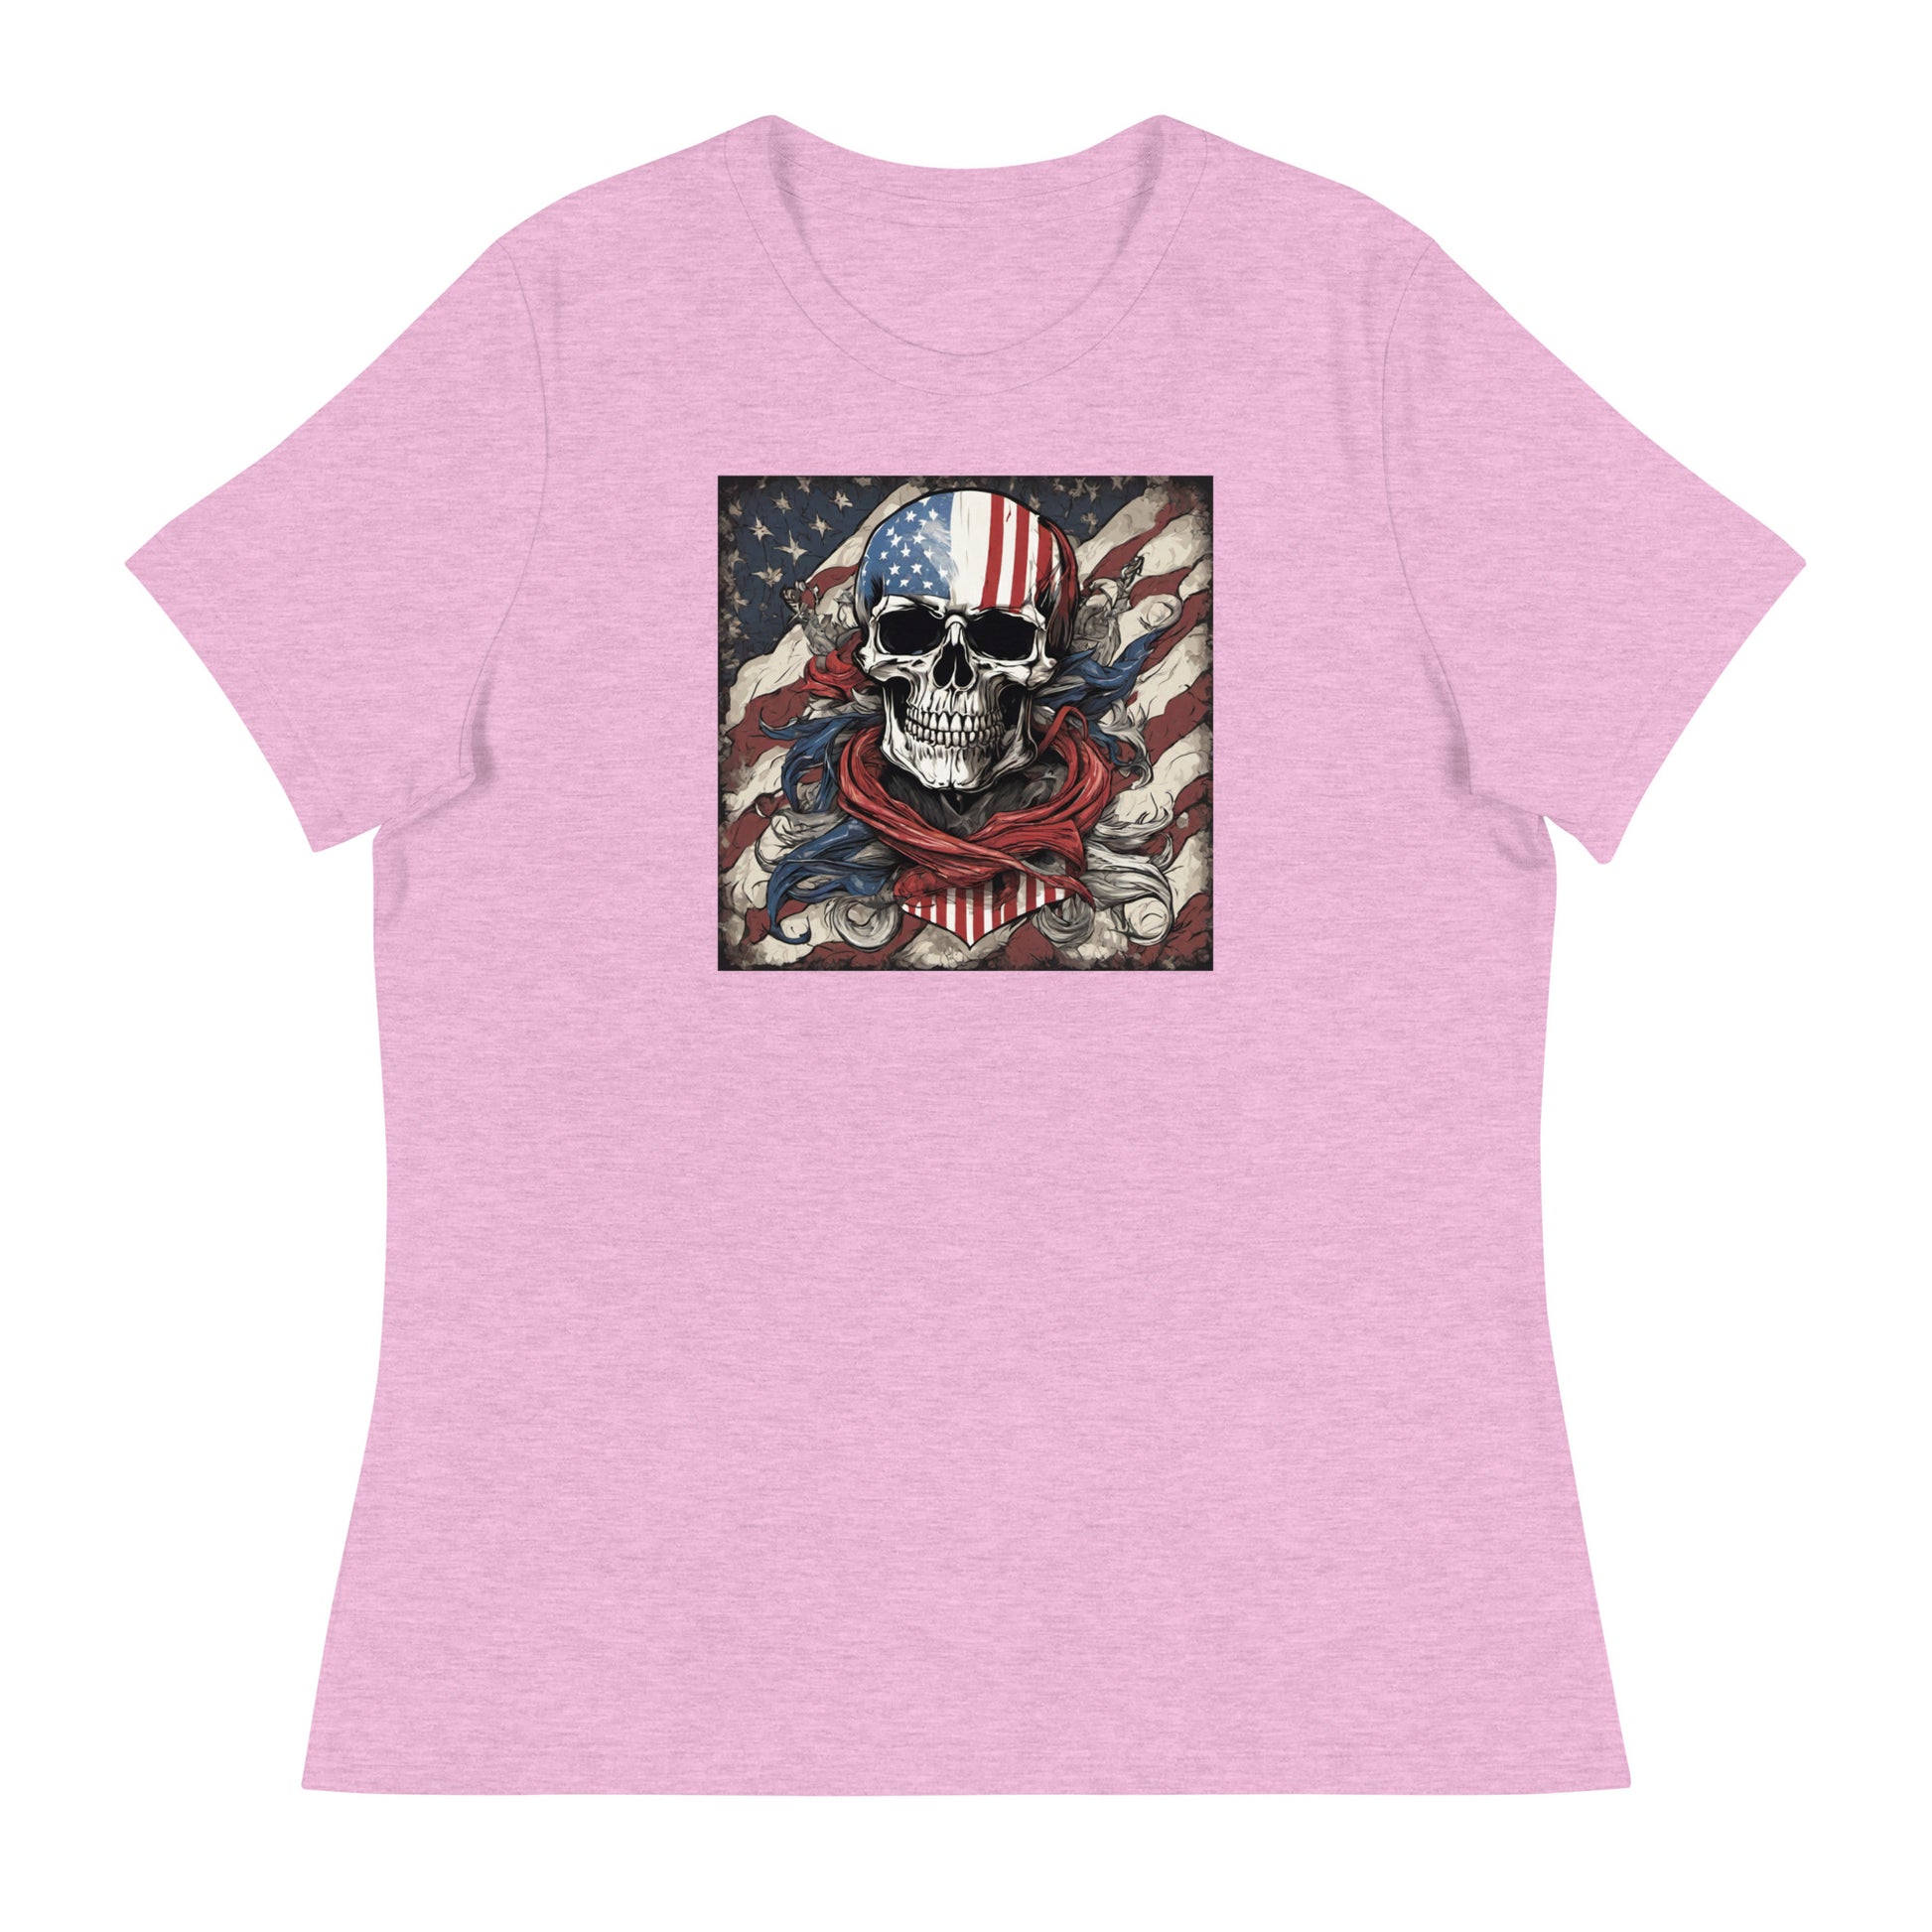 Red, White, & Blue Swashbuckler Women's T-Shirt Heather Prism Lilac